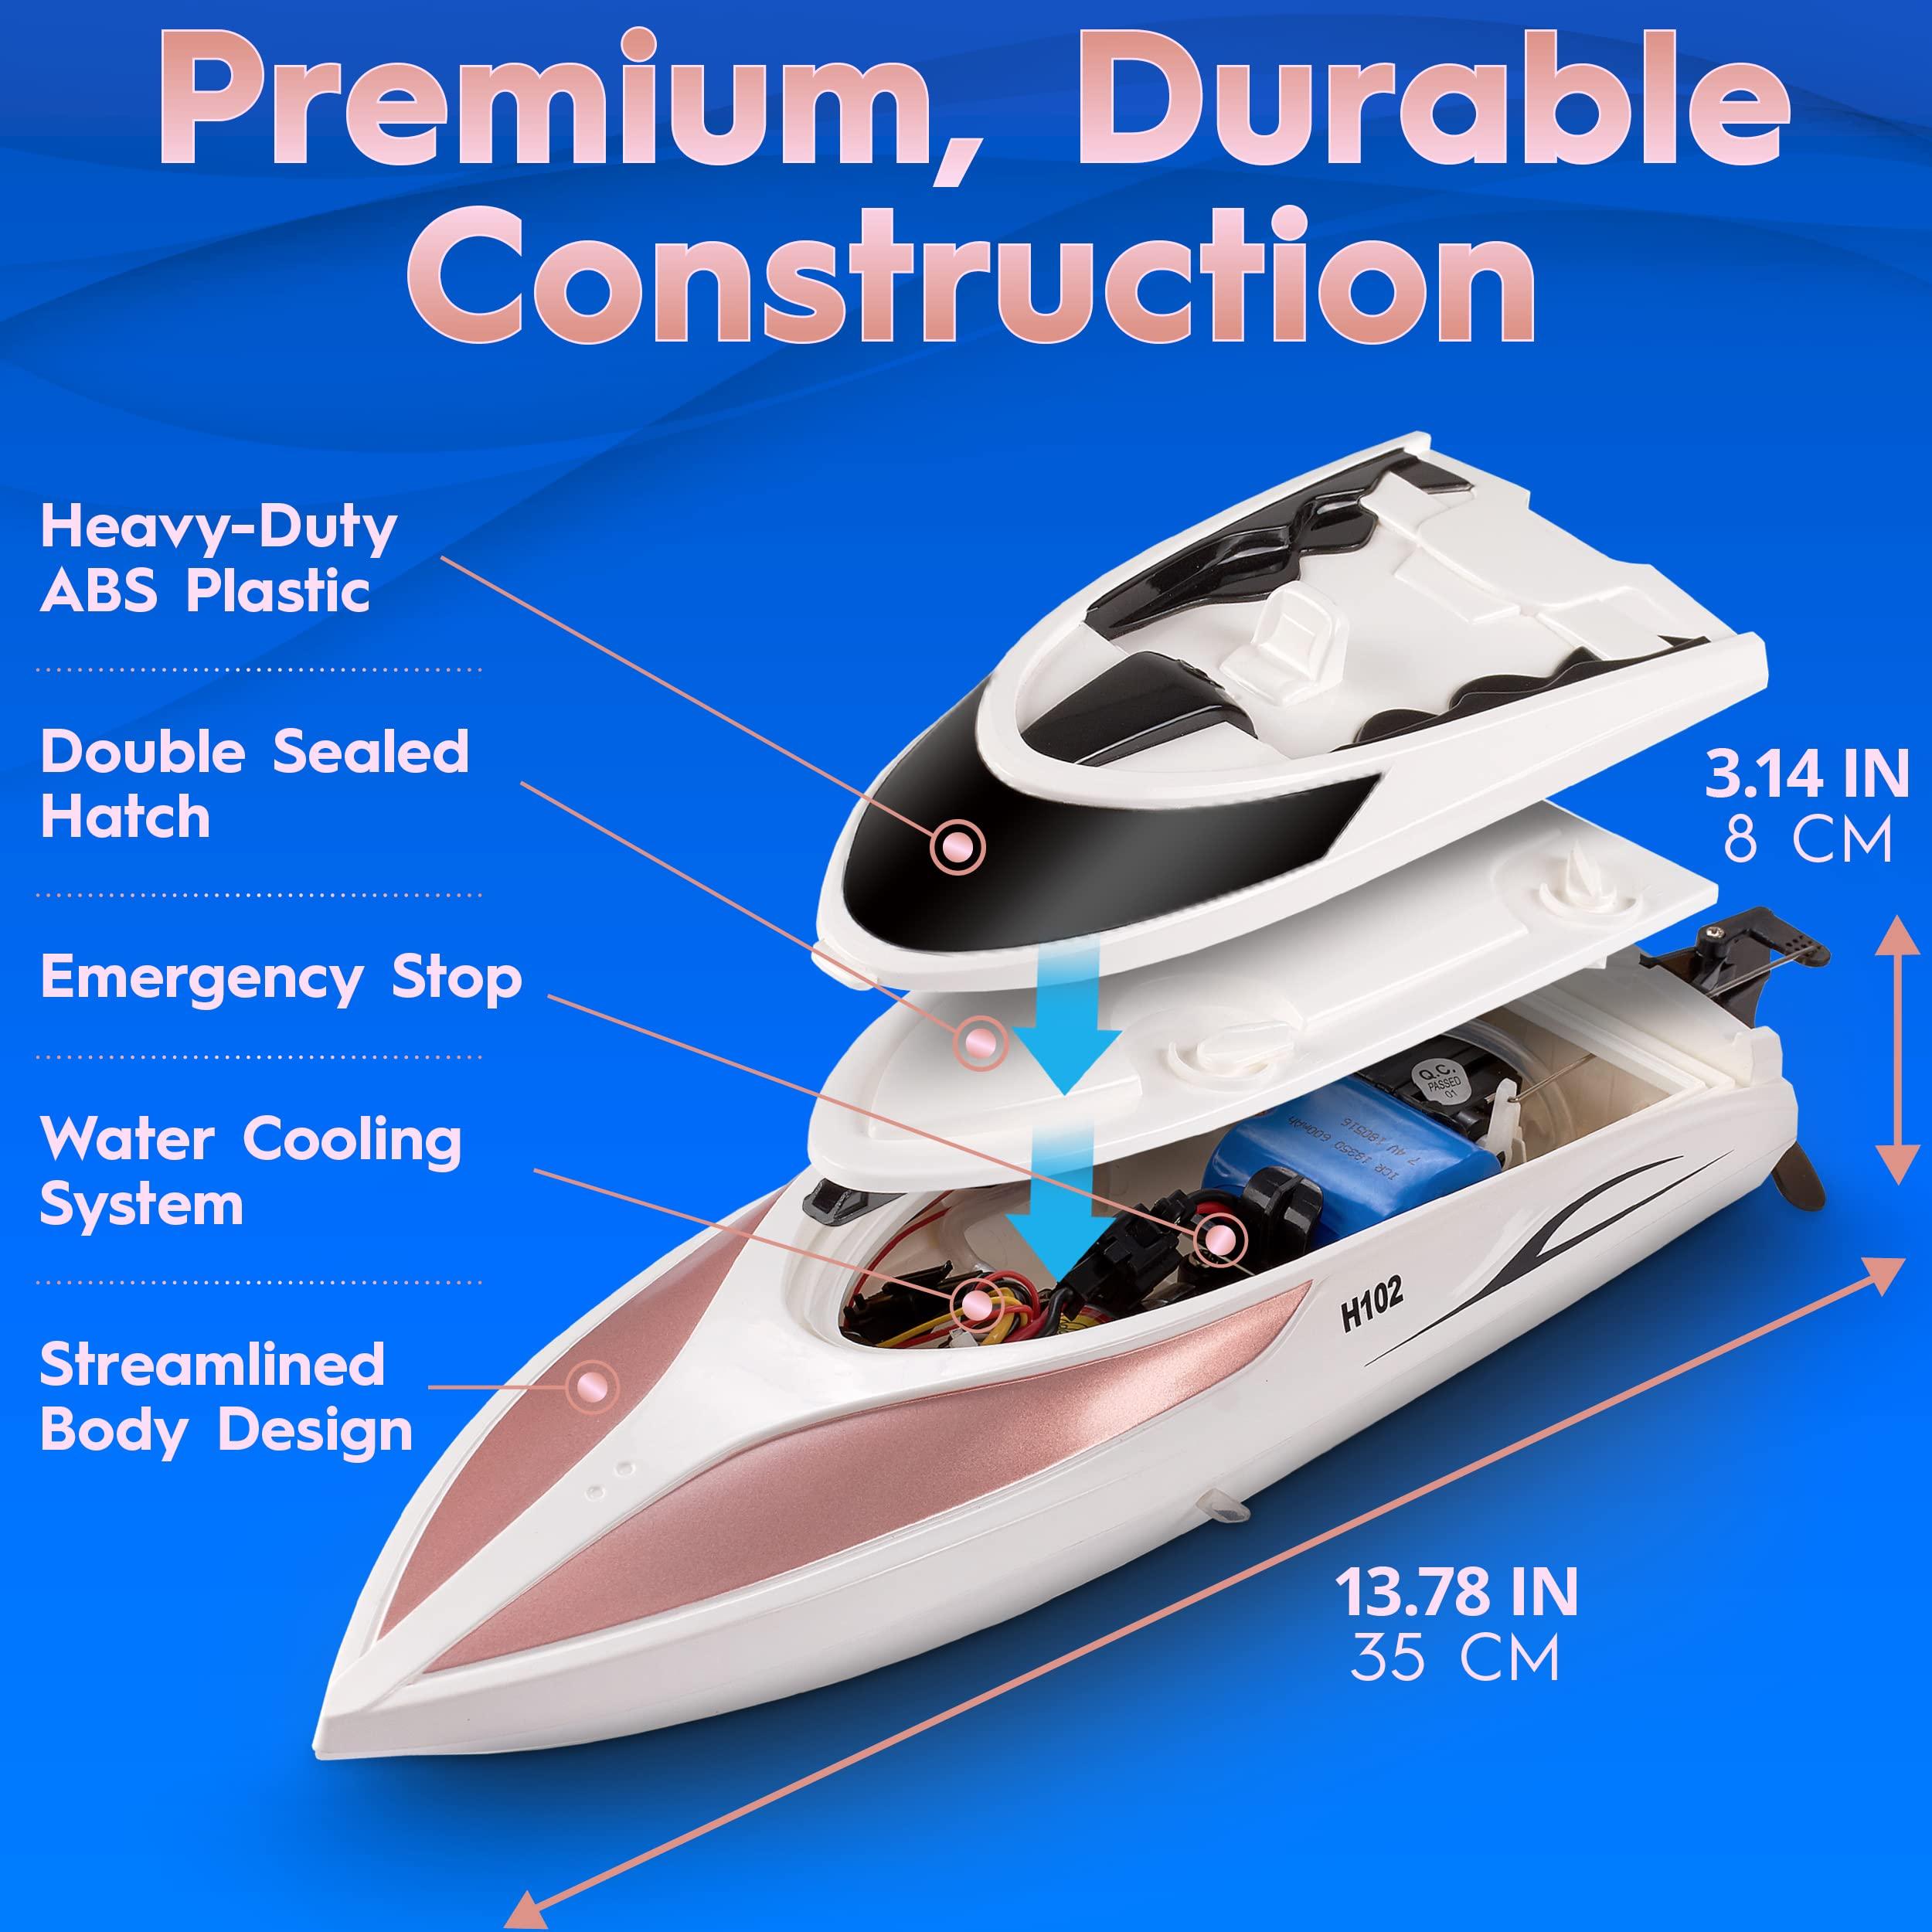 Rc Boat Online Store: Convenient and Reliable: Benefits of Shopping at an RC Boat Online Store